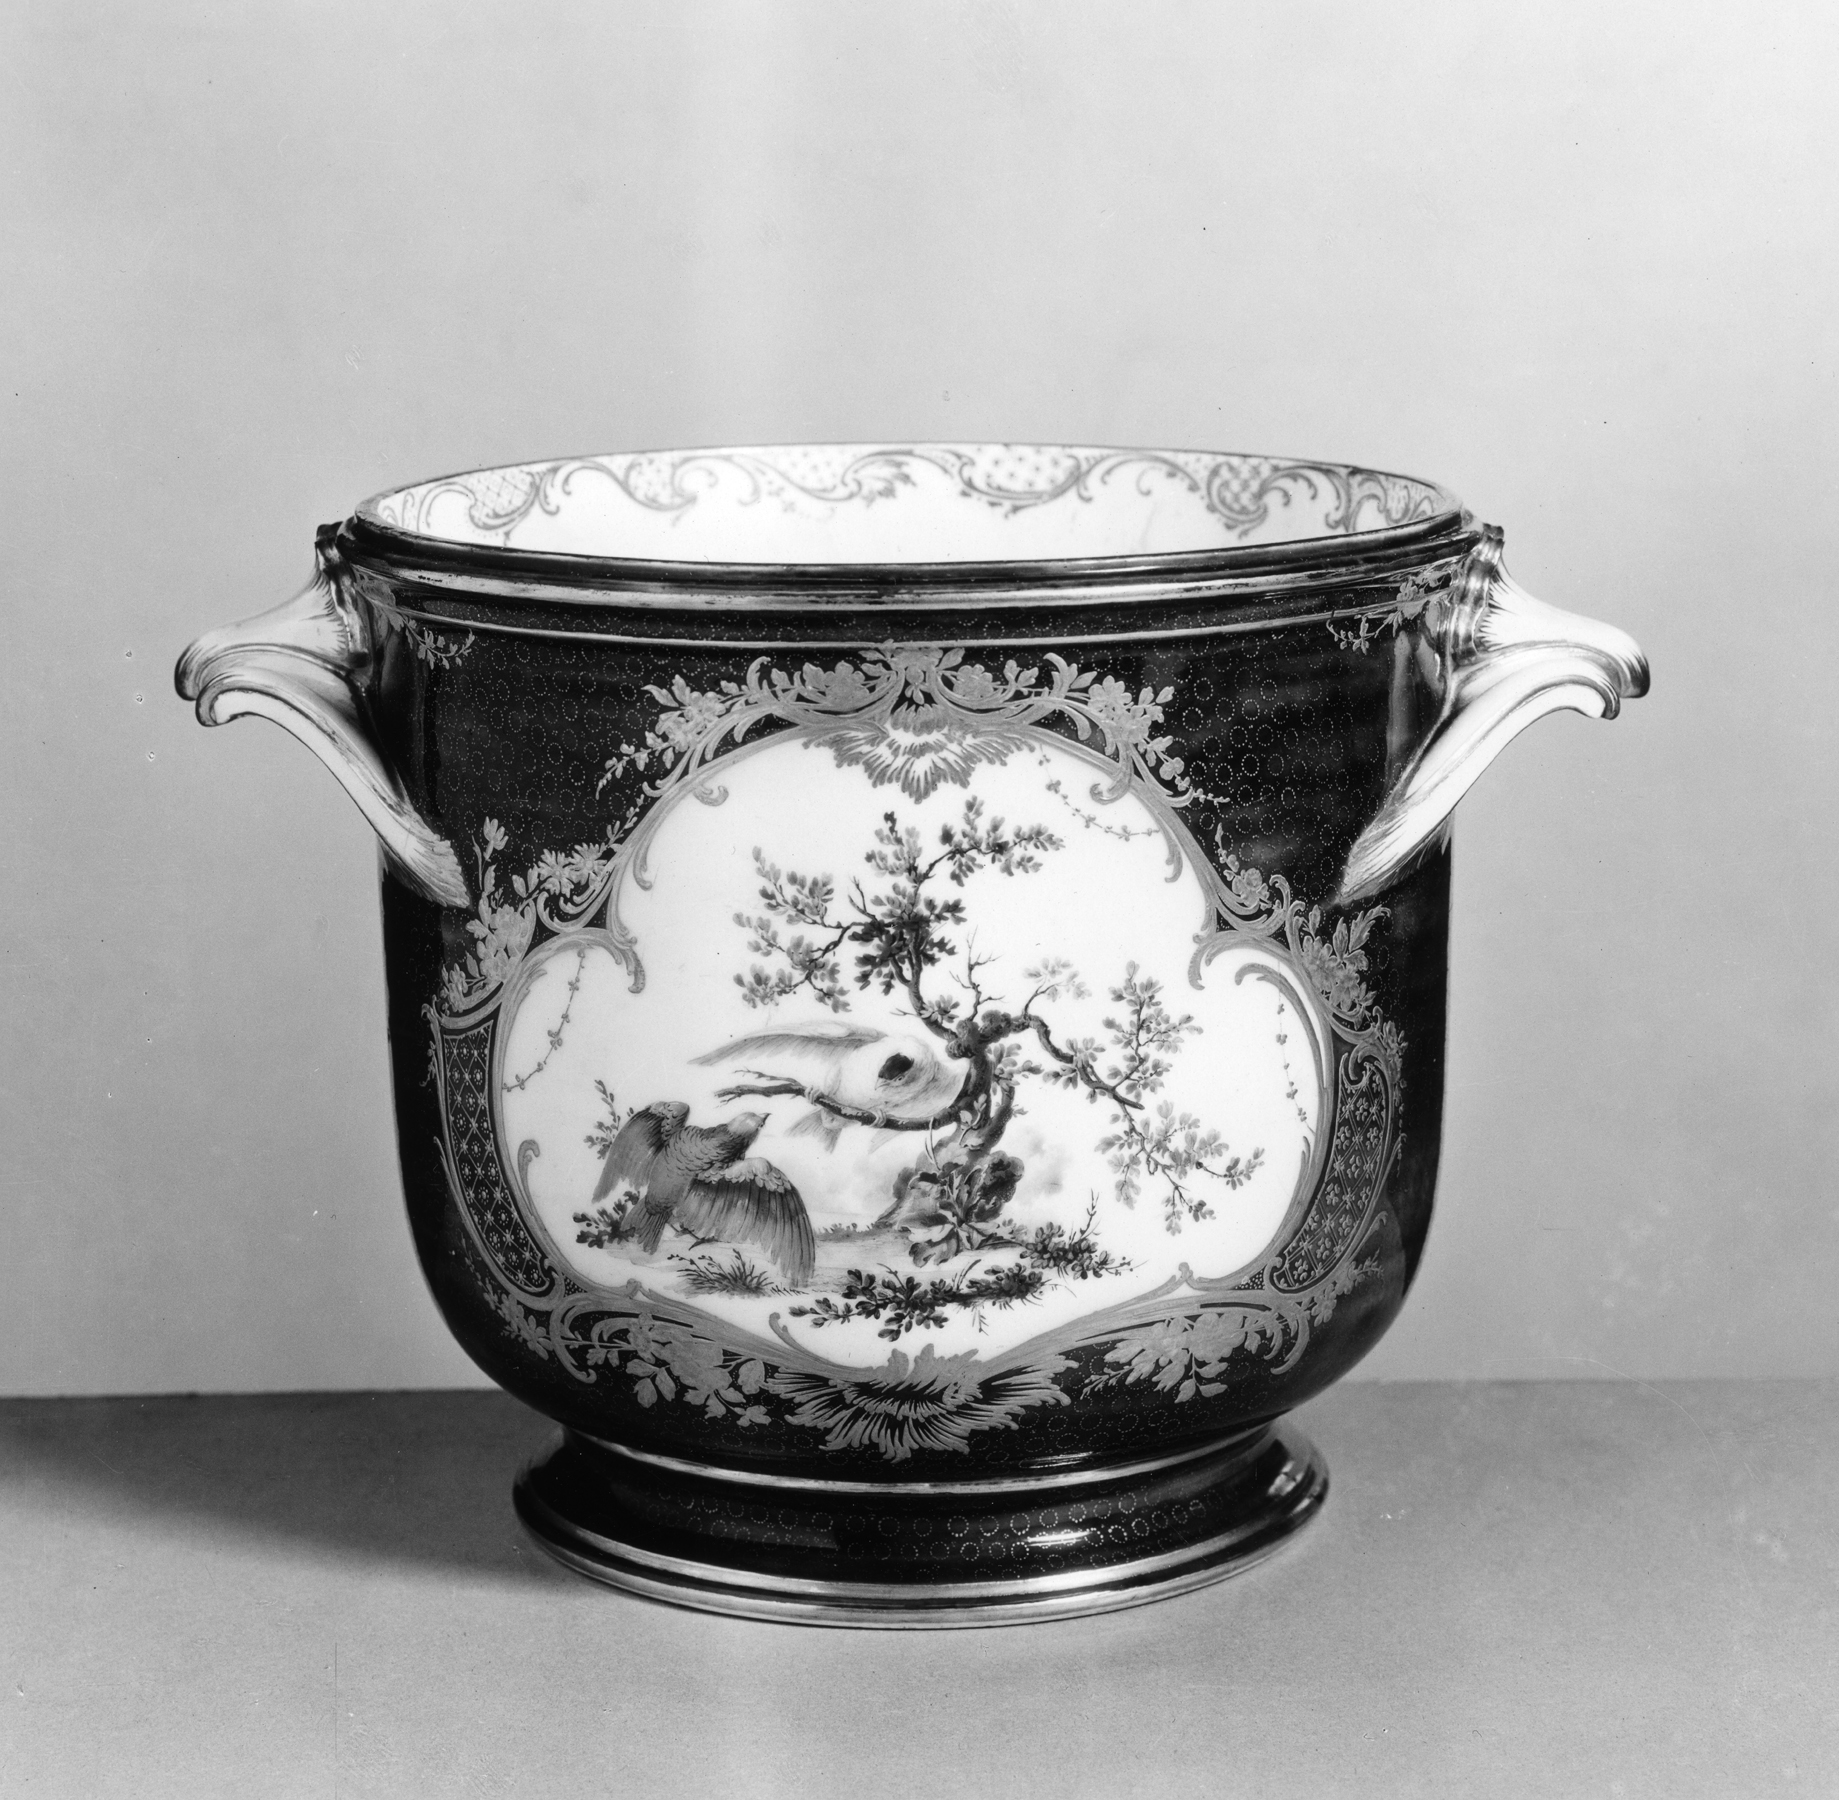 Image for Seau à Demi-Bouteille (Wine Cooler) with Birds and Foliage